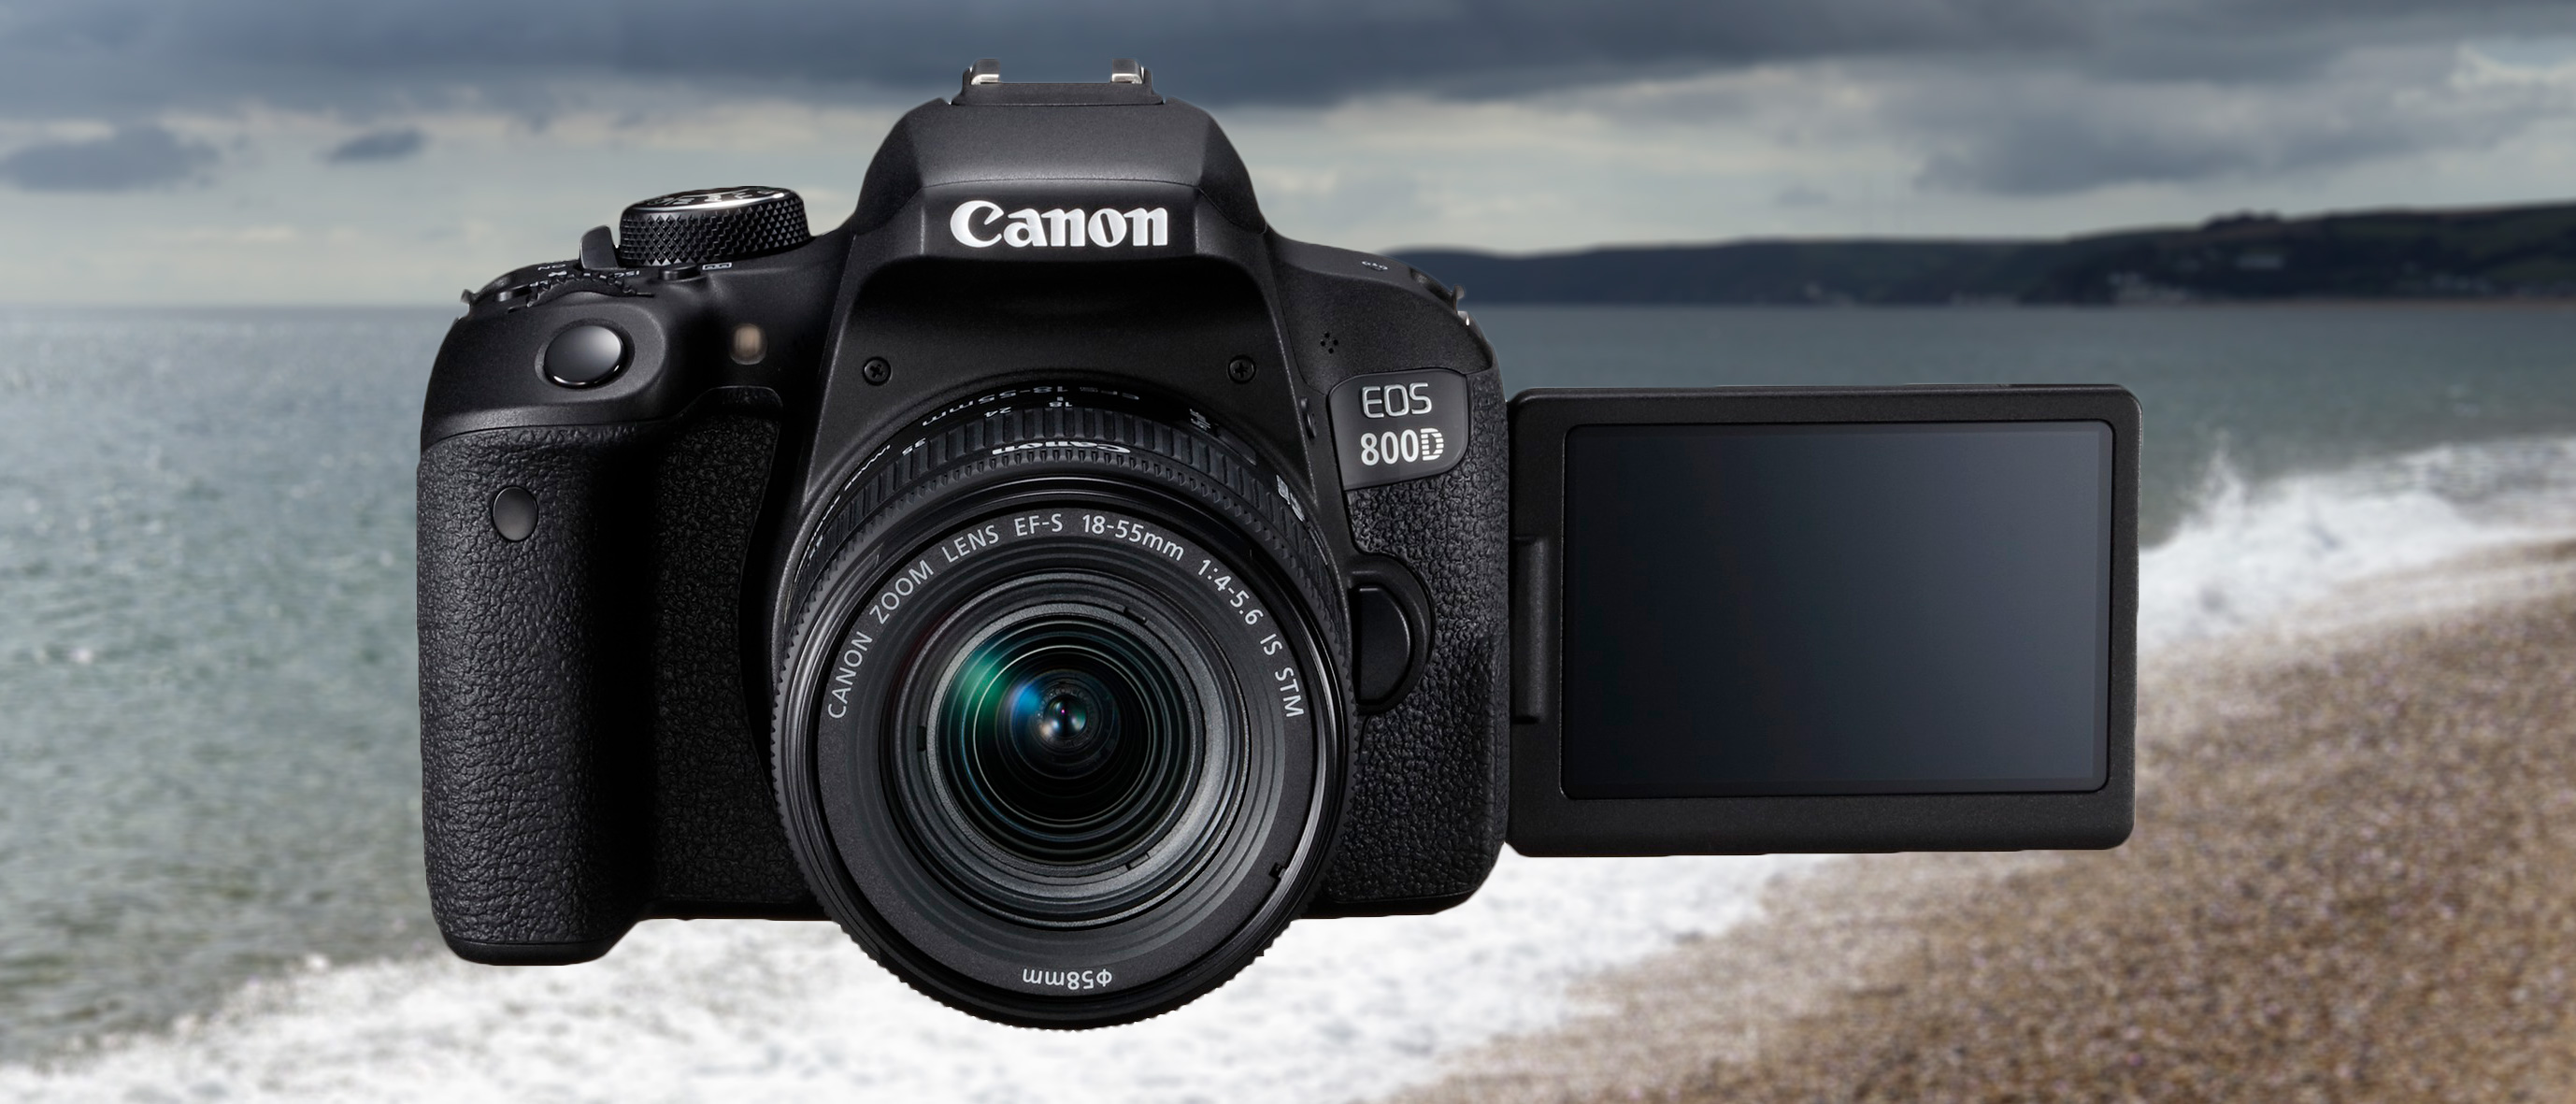 Canon EOS 800D/Rebel T7i Review